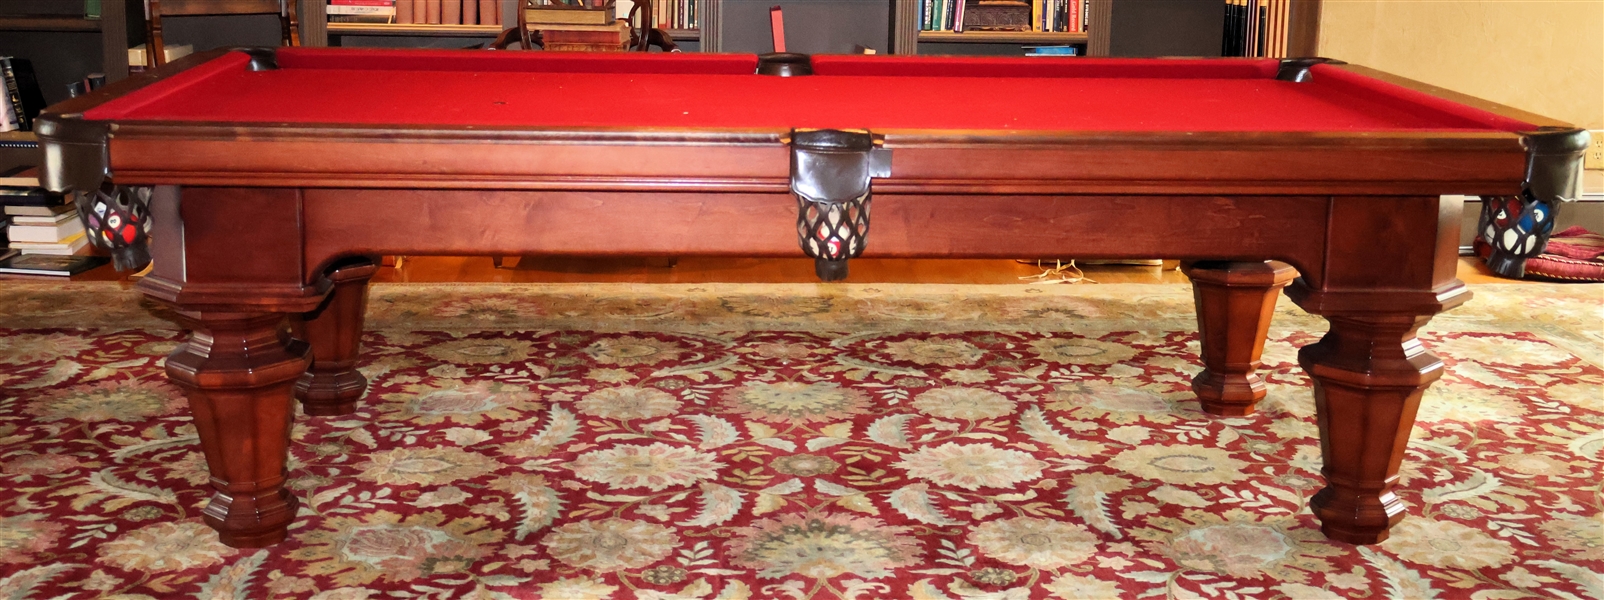 Outstanding Vitalie Slate Top Pool Table - Leather Drop Pockets - Walnut Top Frame - Wood Legs and Base  - Slate Top - Table Measures 31 1/2" Tall 87" by 49"